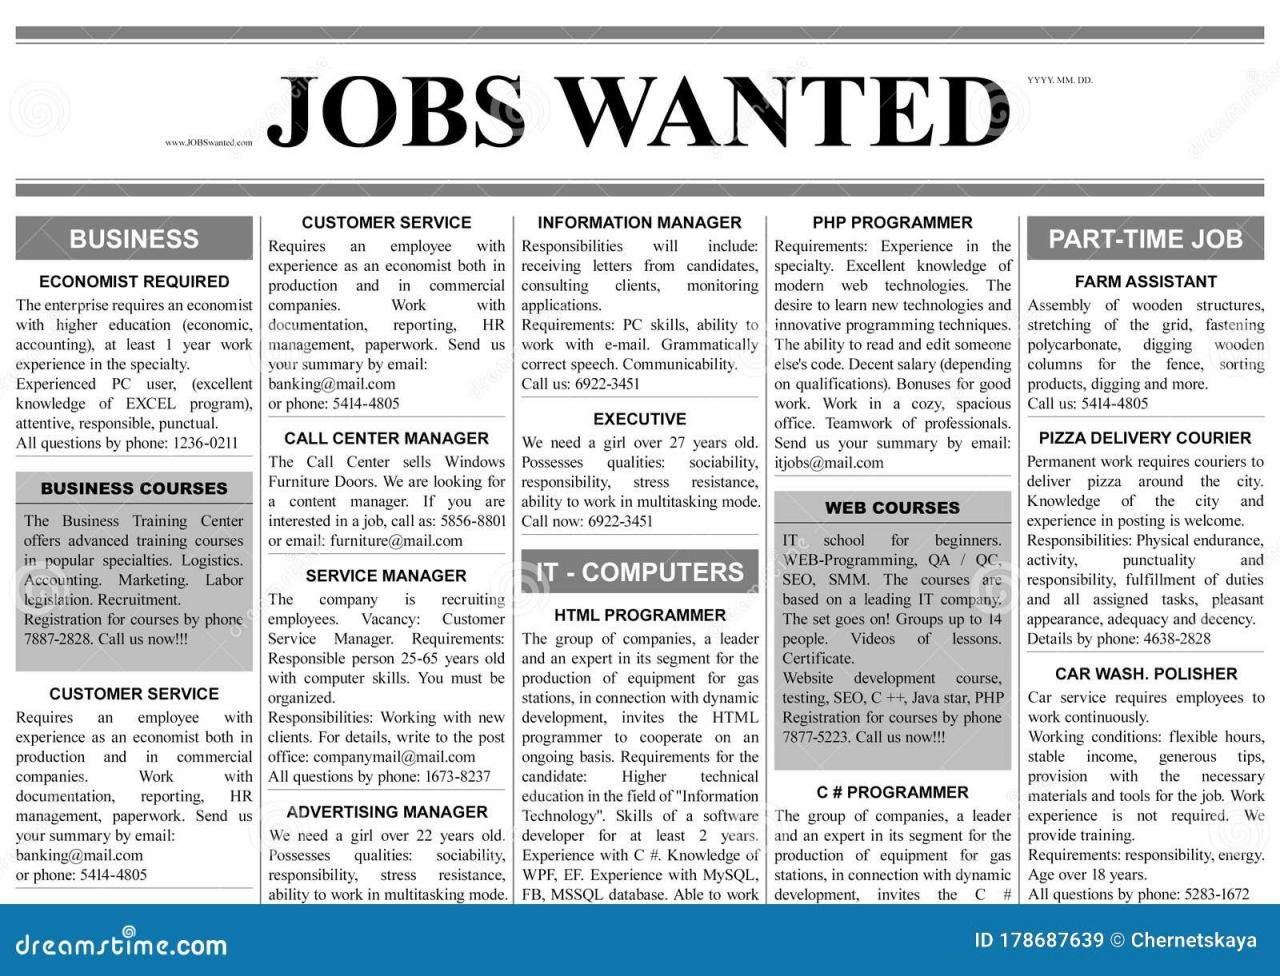 An example of a job advertisement